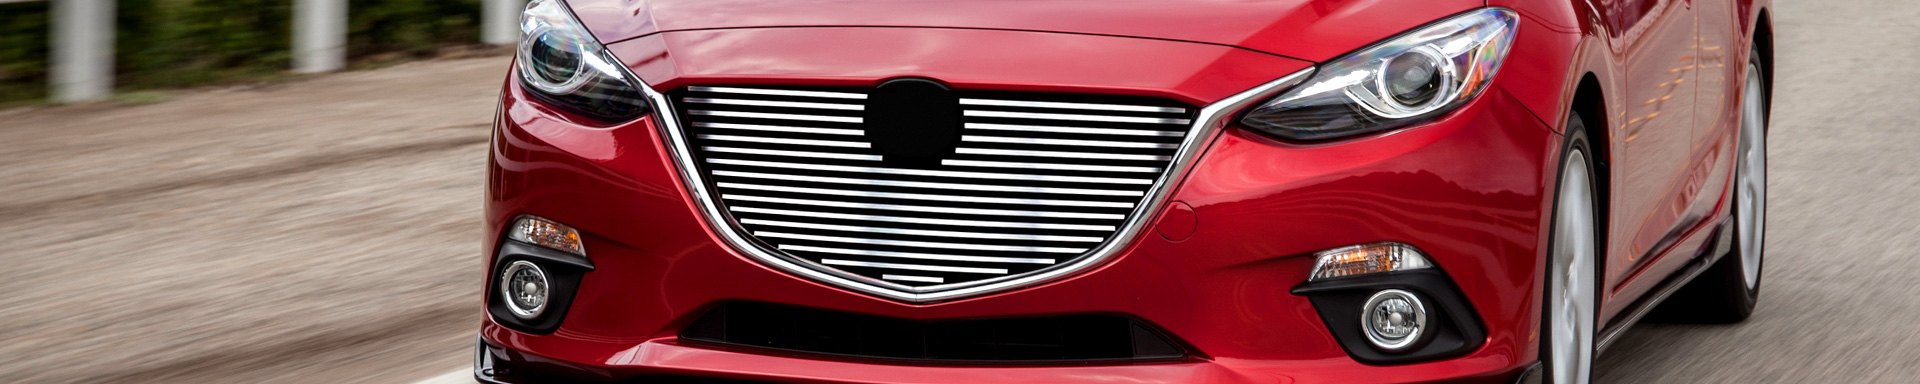 APG Introduced New Horizontal Billet Grilles Now Available for Mazda 3